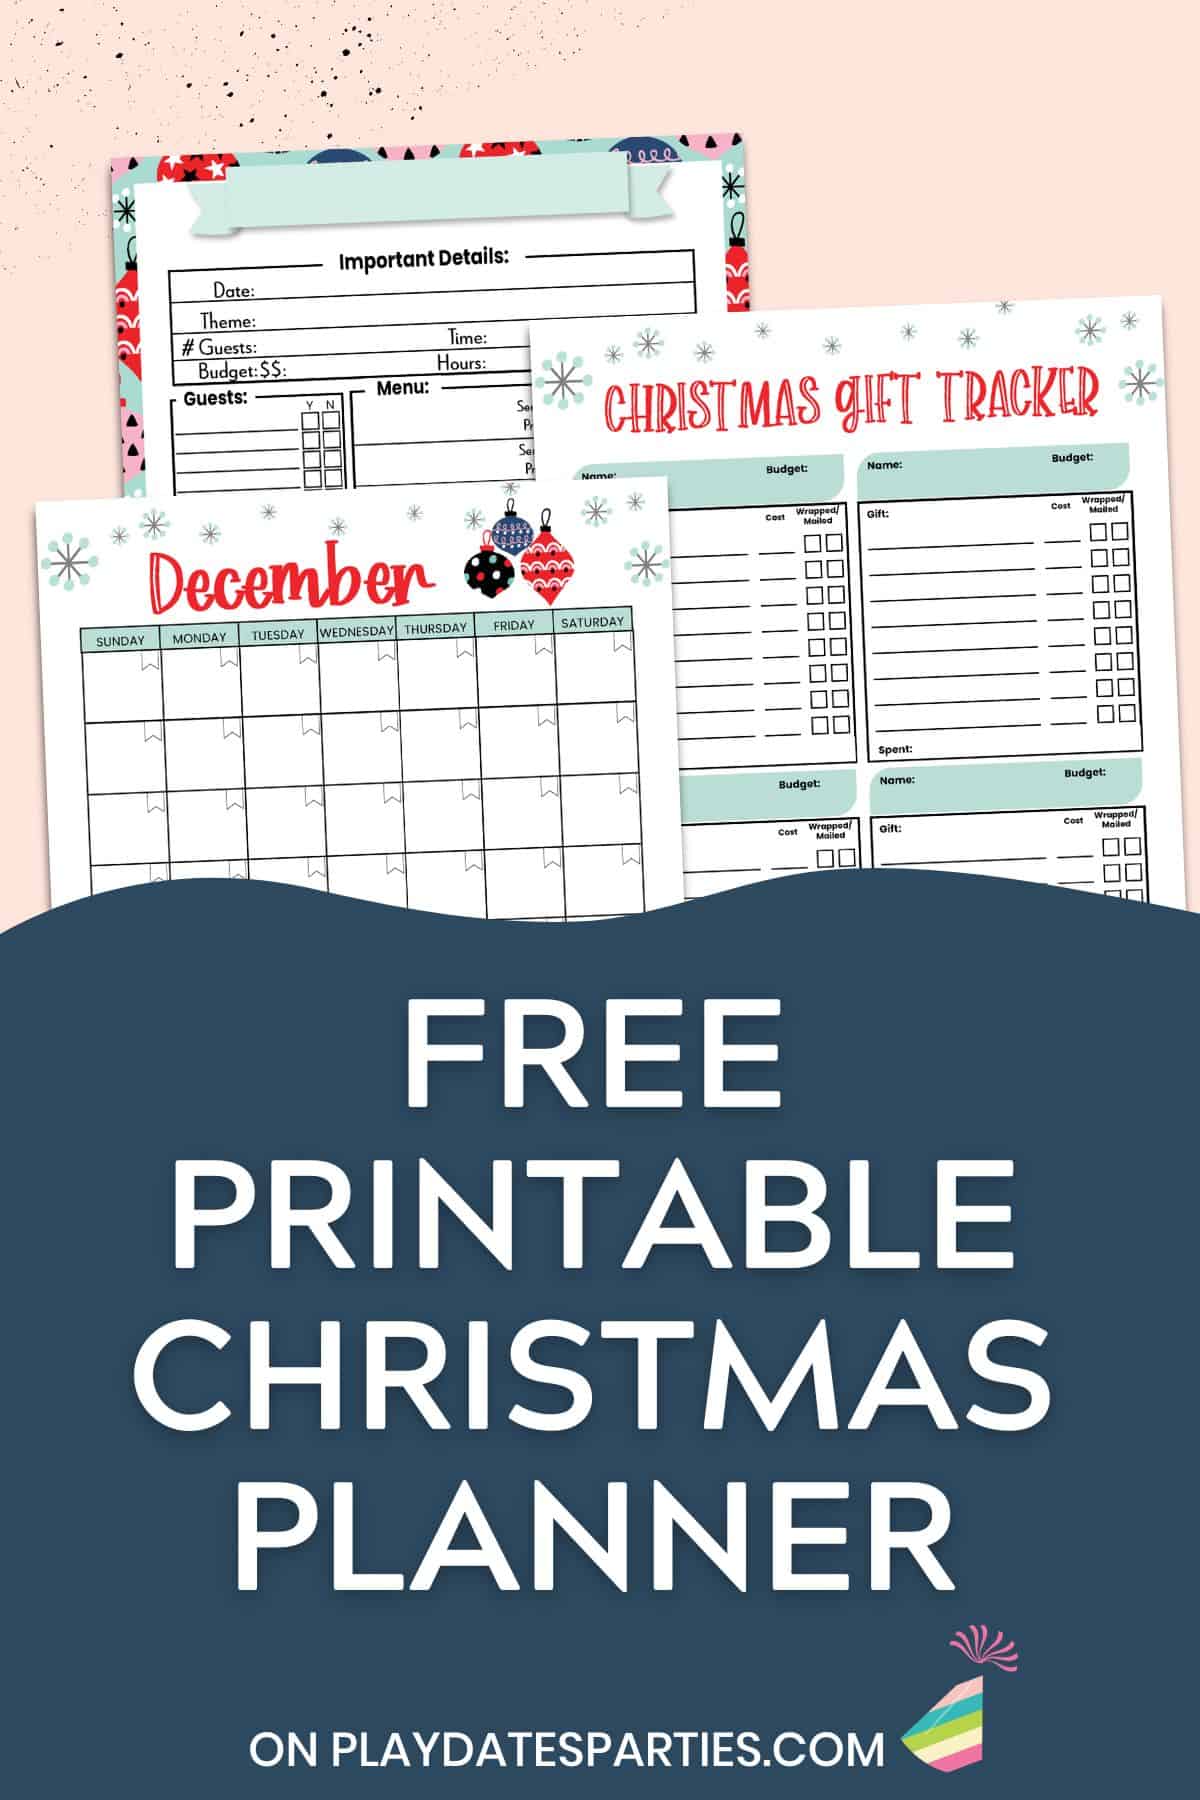 Three printable planner pages with text overlay free printable Christmas planner.